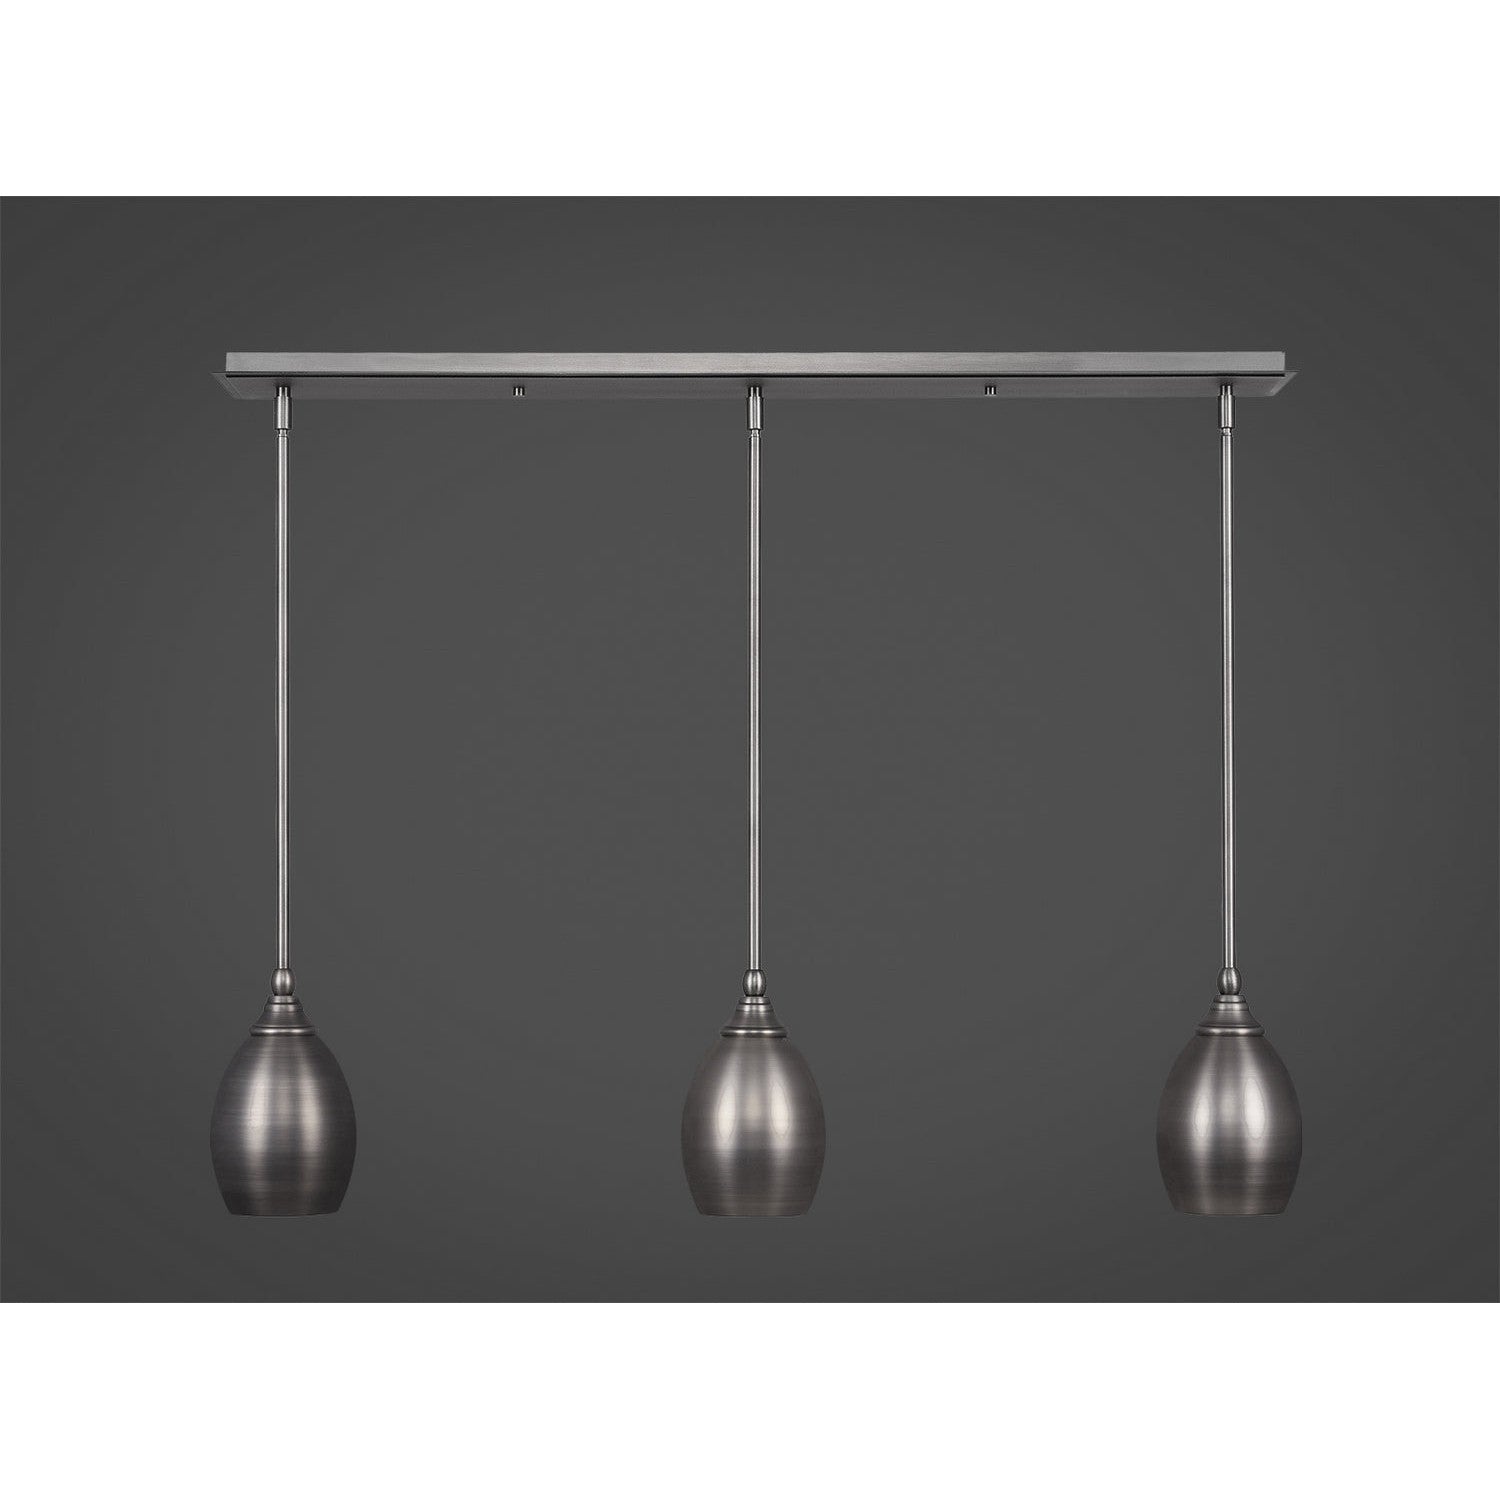 Toltec Any 36-bn-426 Pendant Light - Brushed Nickel